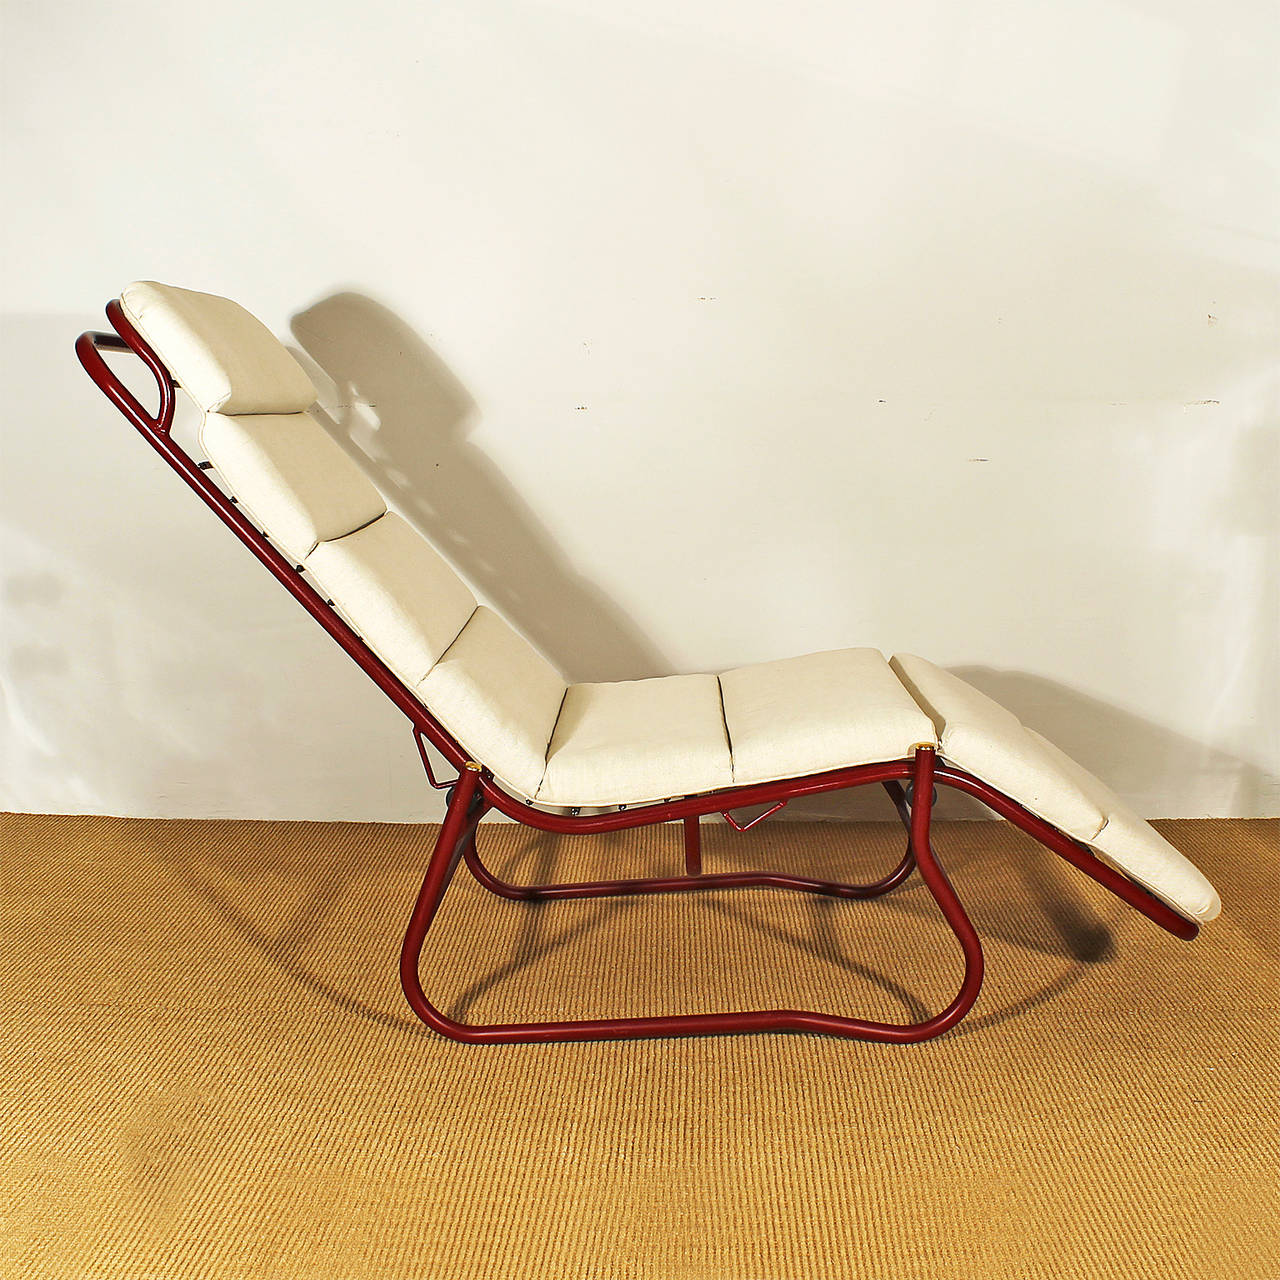 Nice and elegant Bauhaus style chaise longue, red laquered tube structure, taut springs seat, two positions, mattress with off-white linen upholstery.
France c. 1920